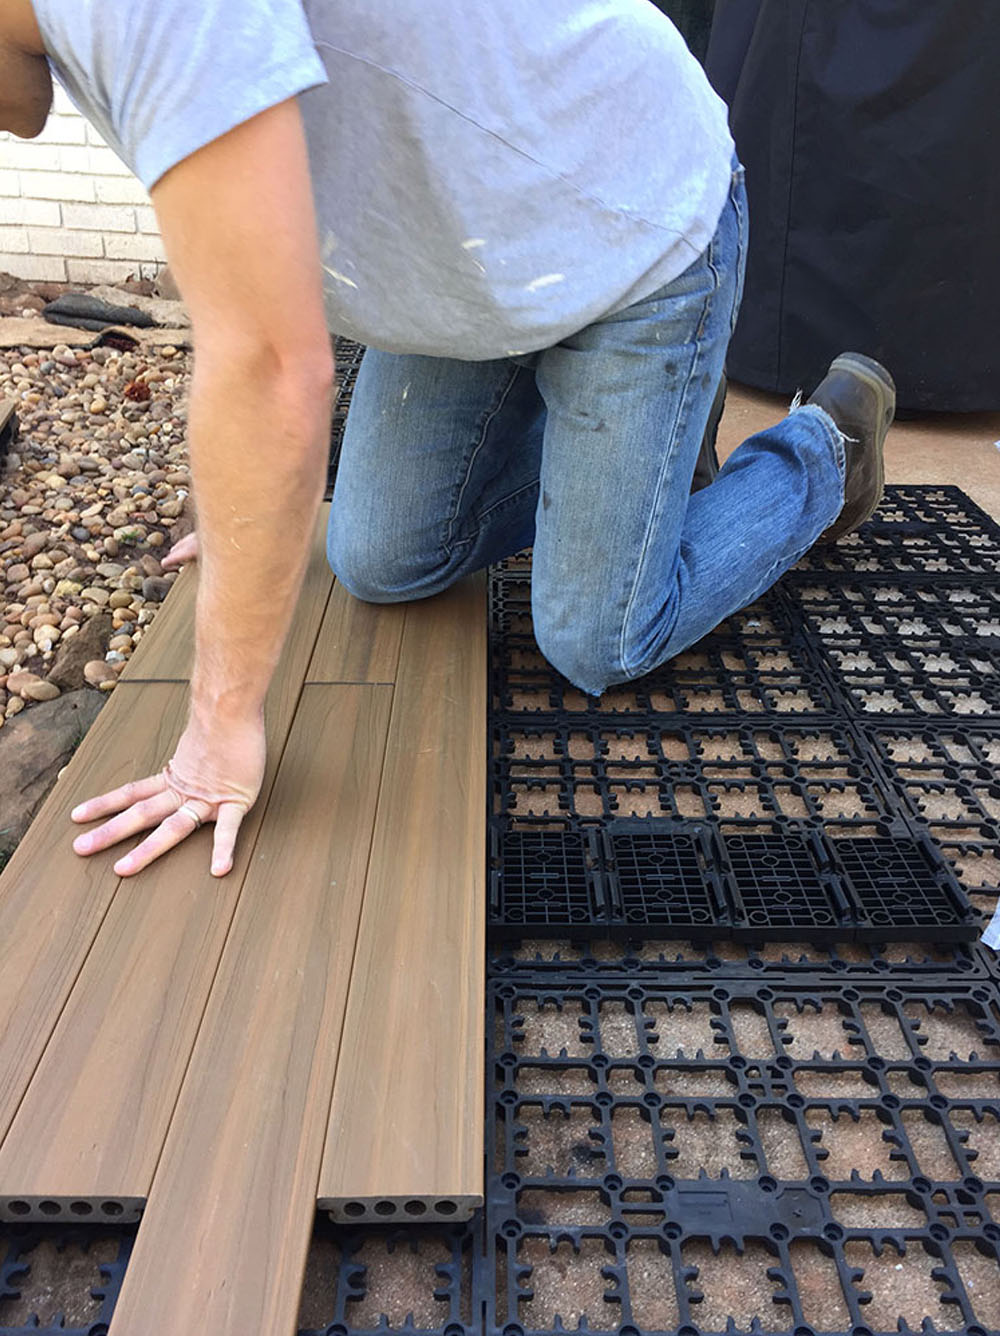 How to Lay Deck Flooring on a Concrete Patio - The Home Depot